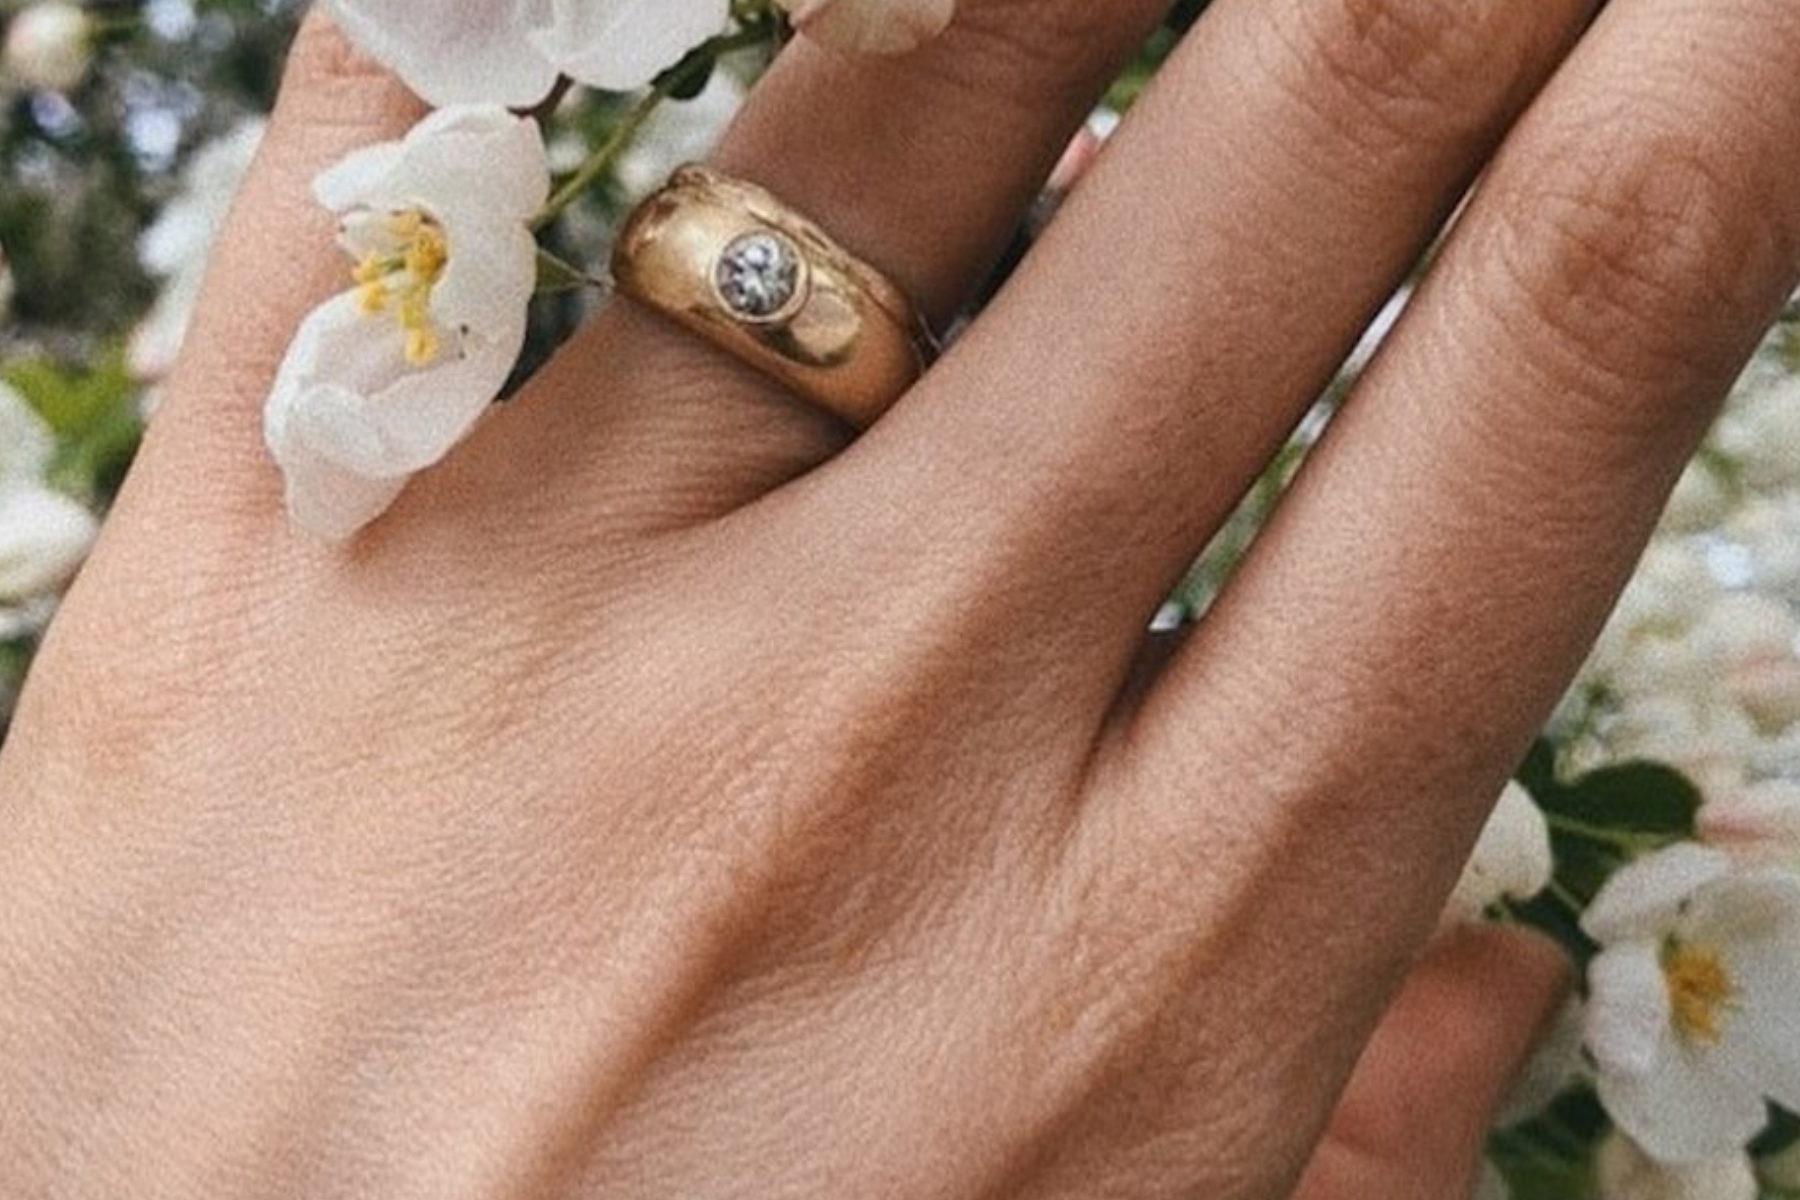 A woman's hand holding a flower while wearing an engagement ring with a flush setting